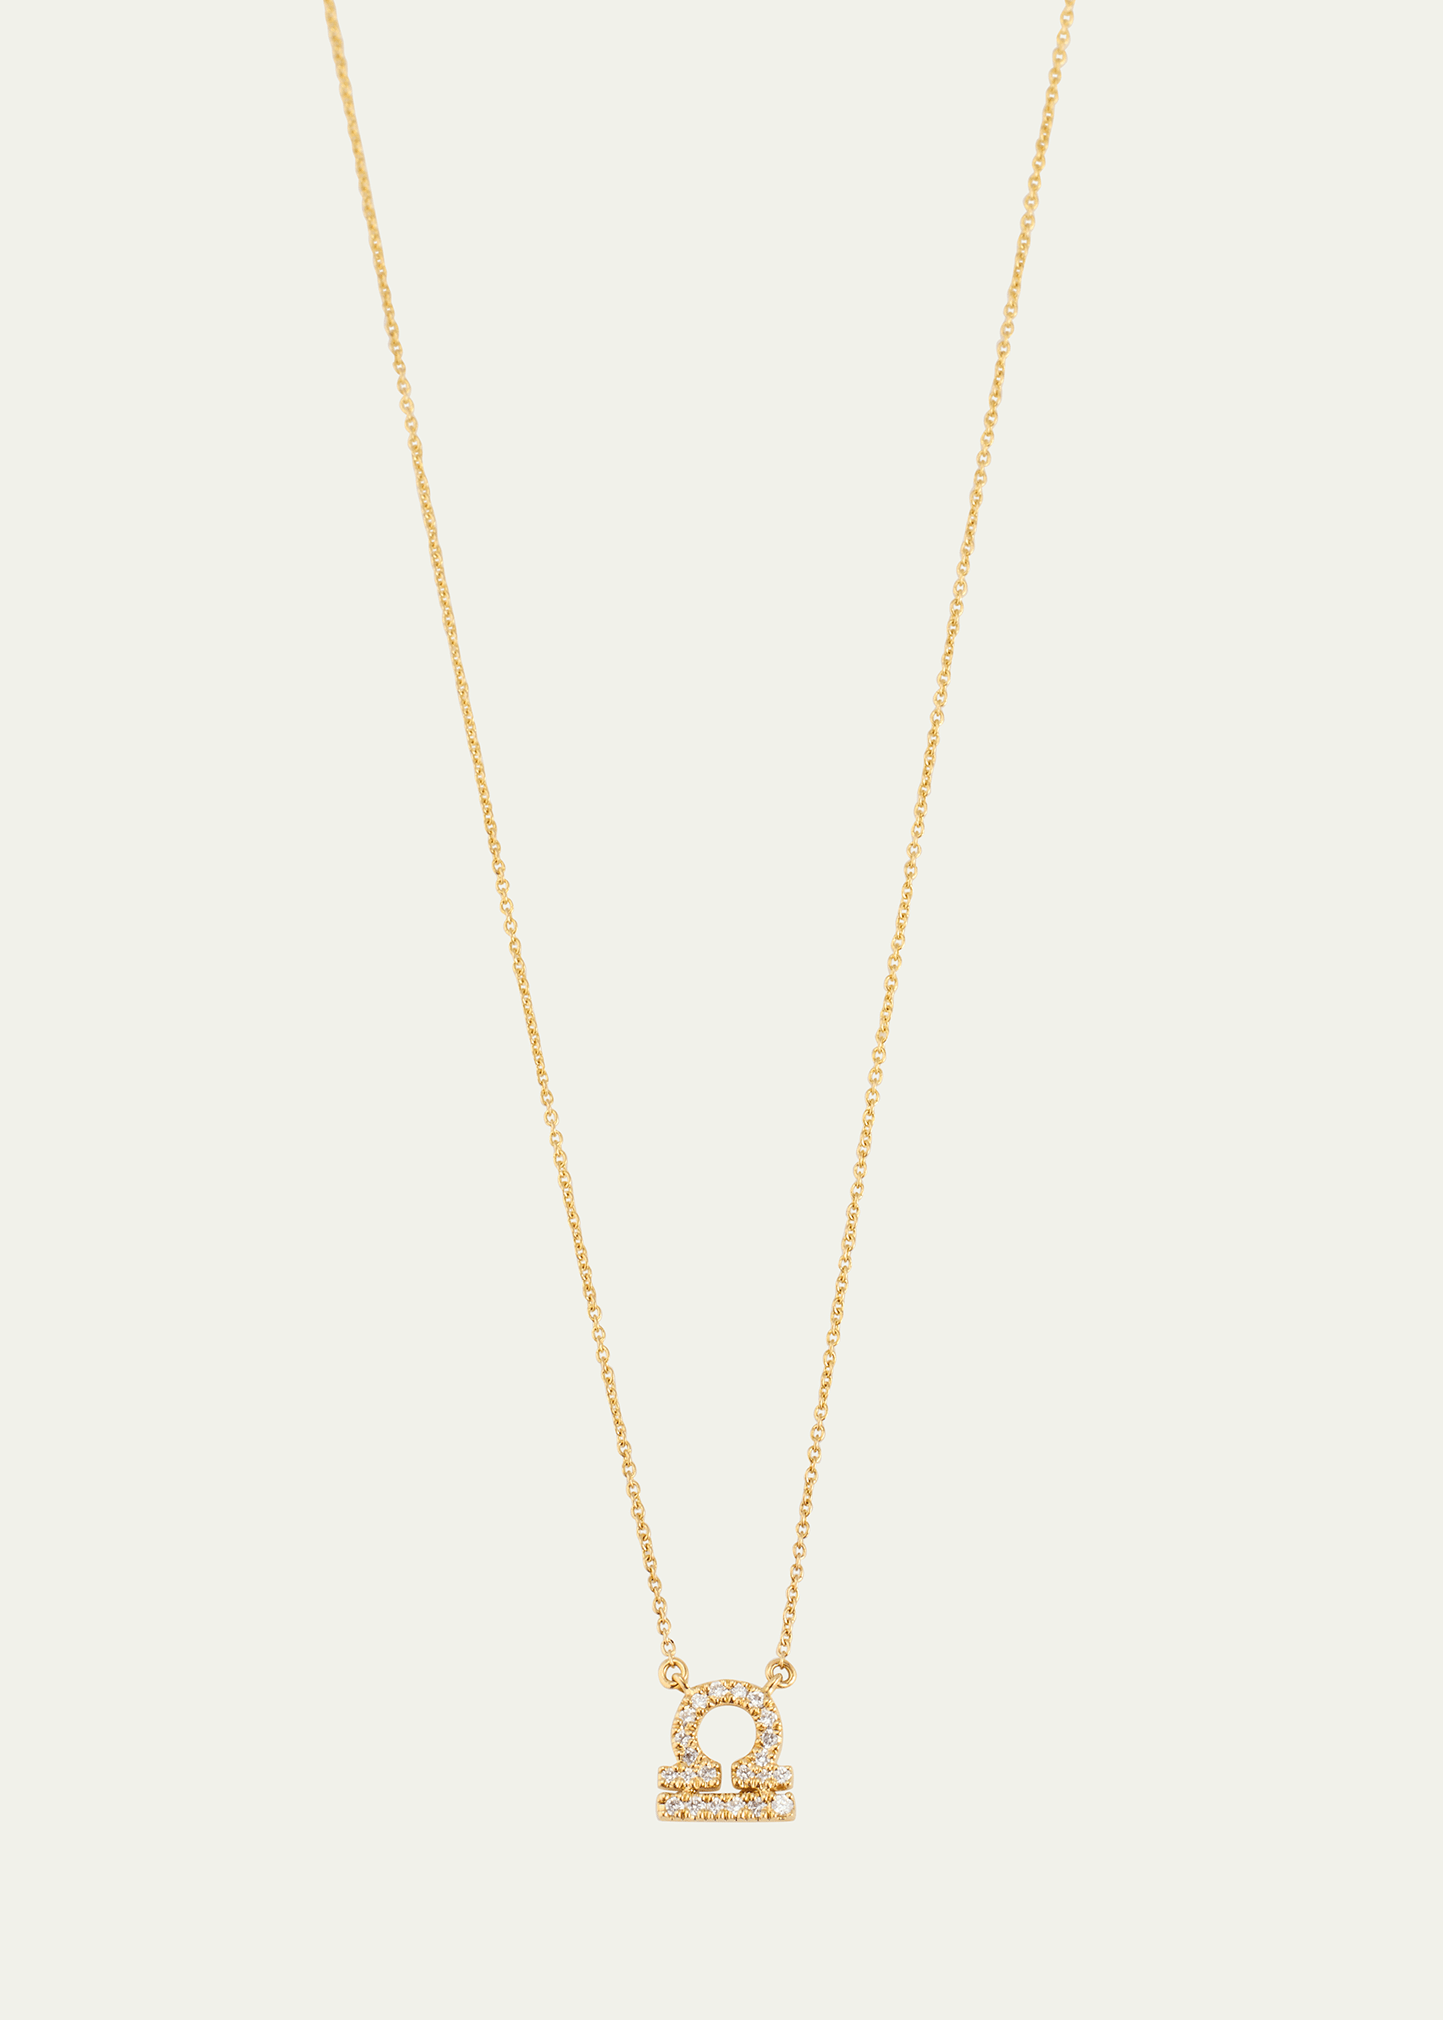 Star Sign Necklace, Libra, in Yellow Gold and White Diamonds